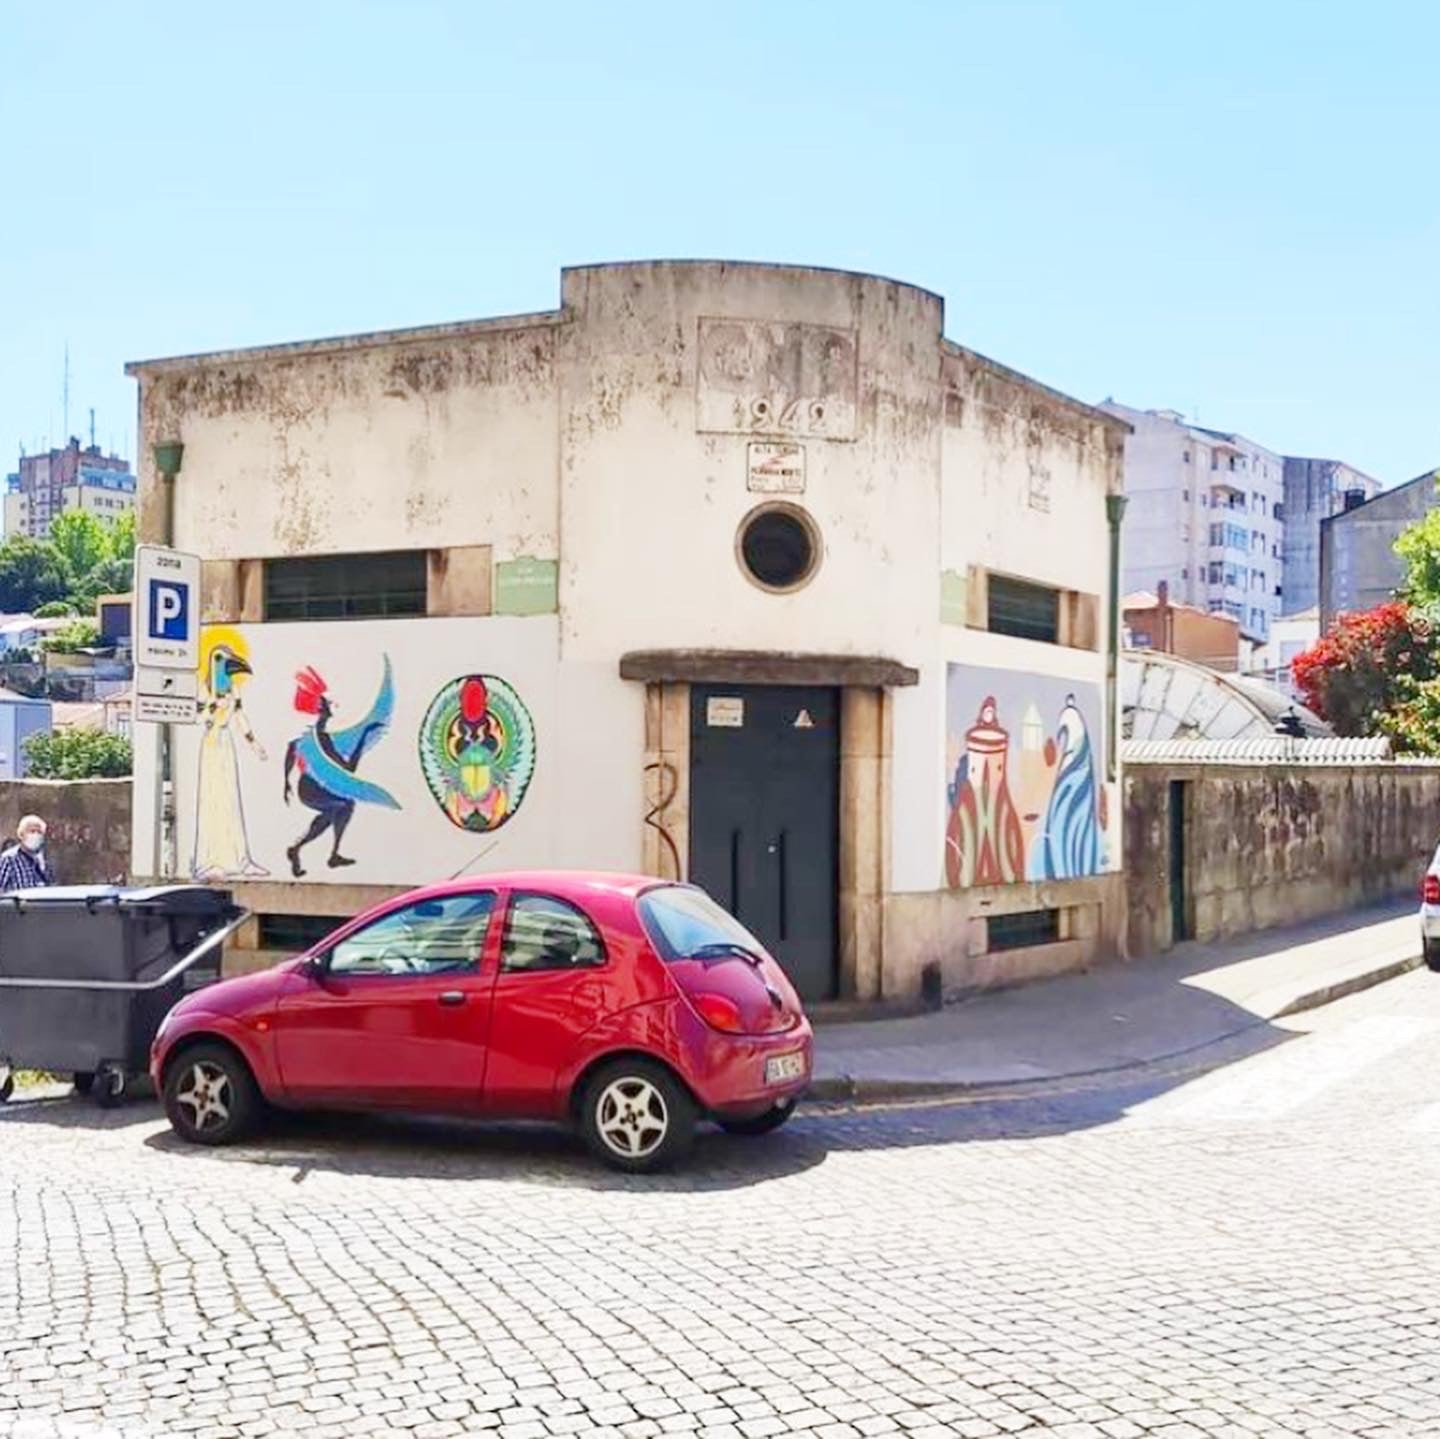 Paste-up Painting Workshop with Arisca in Porto, Portugal by subcultours